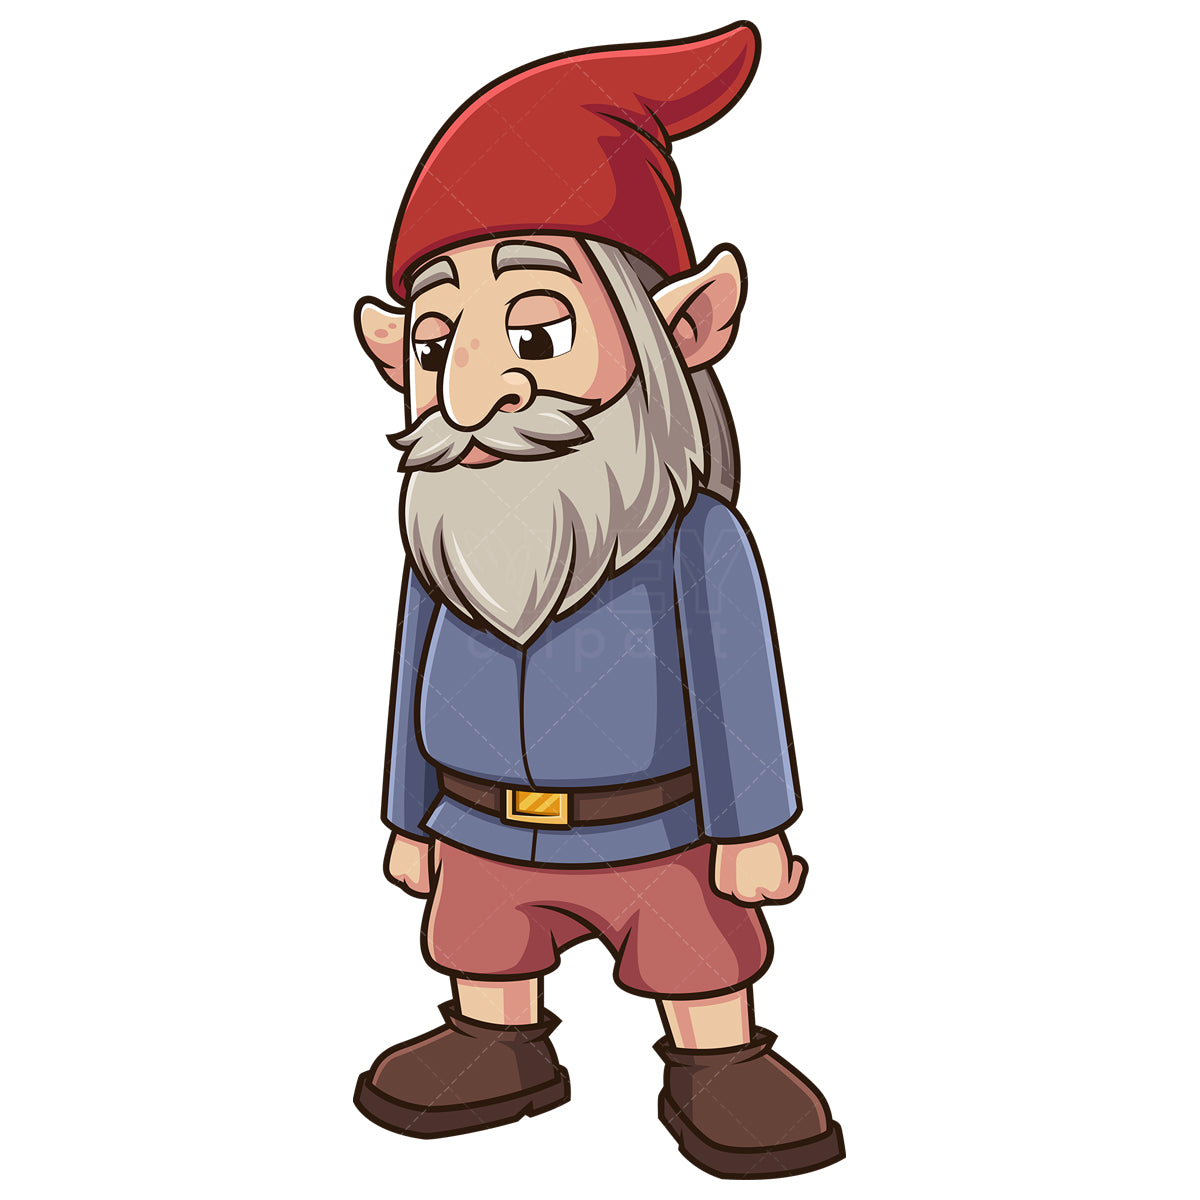 Royalty-free stock vector illustration of a sad gnome.